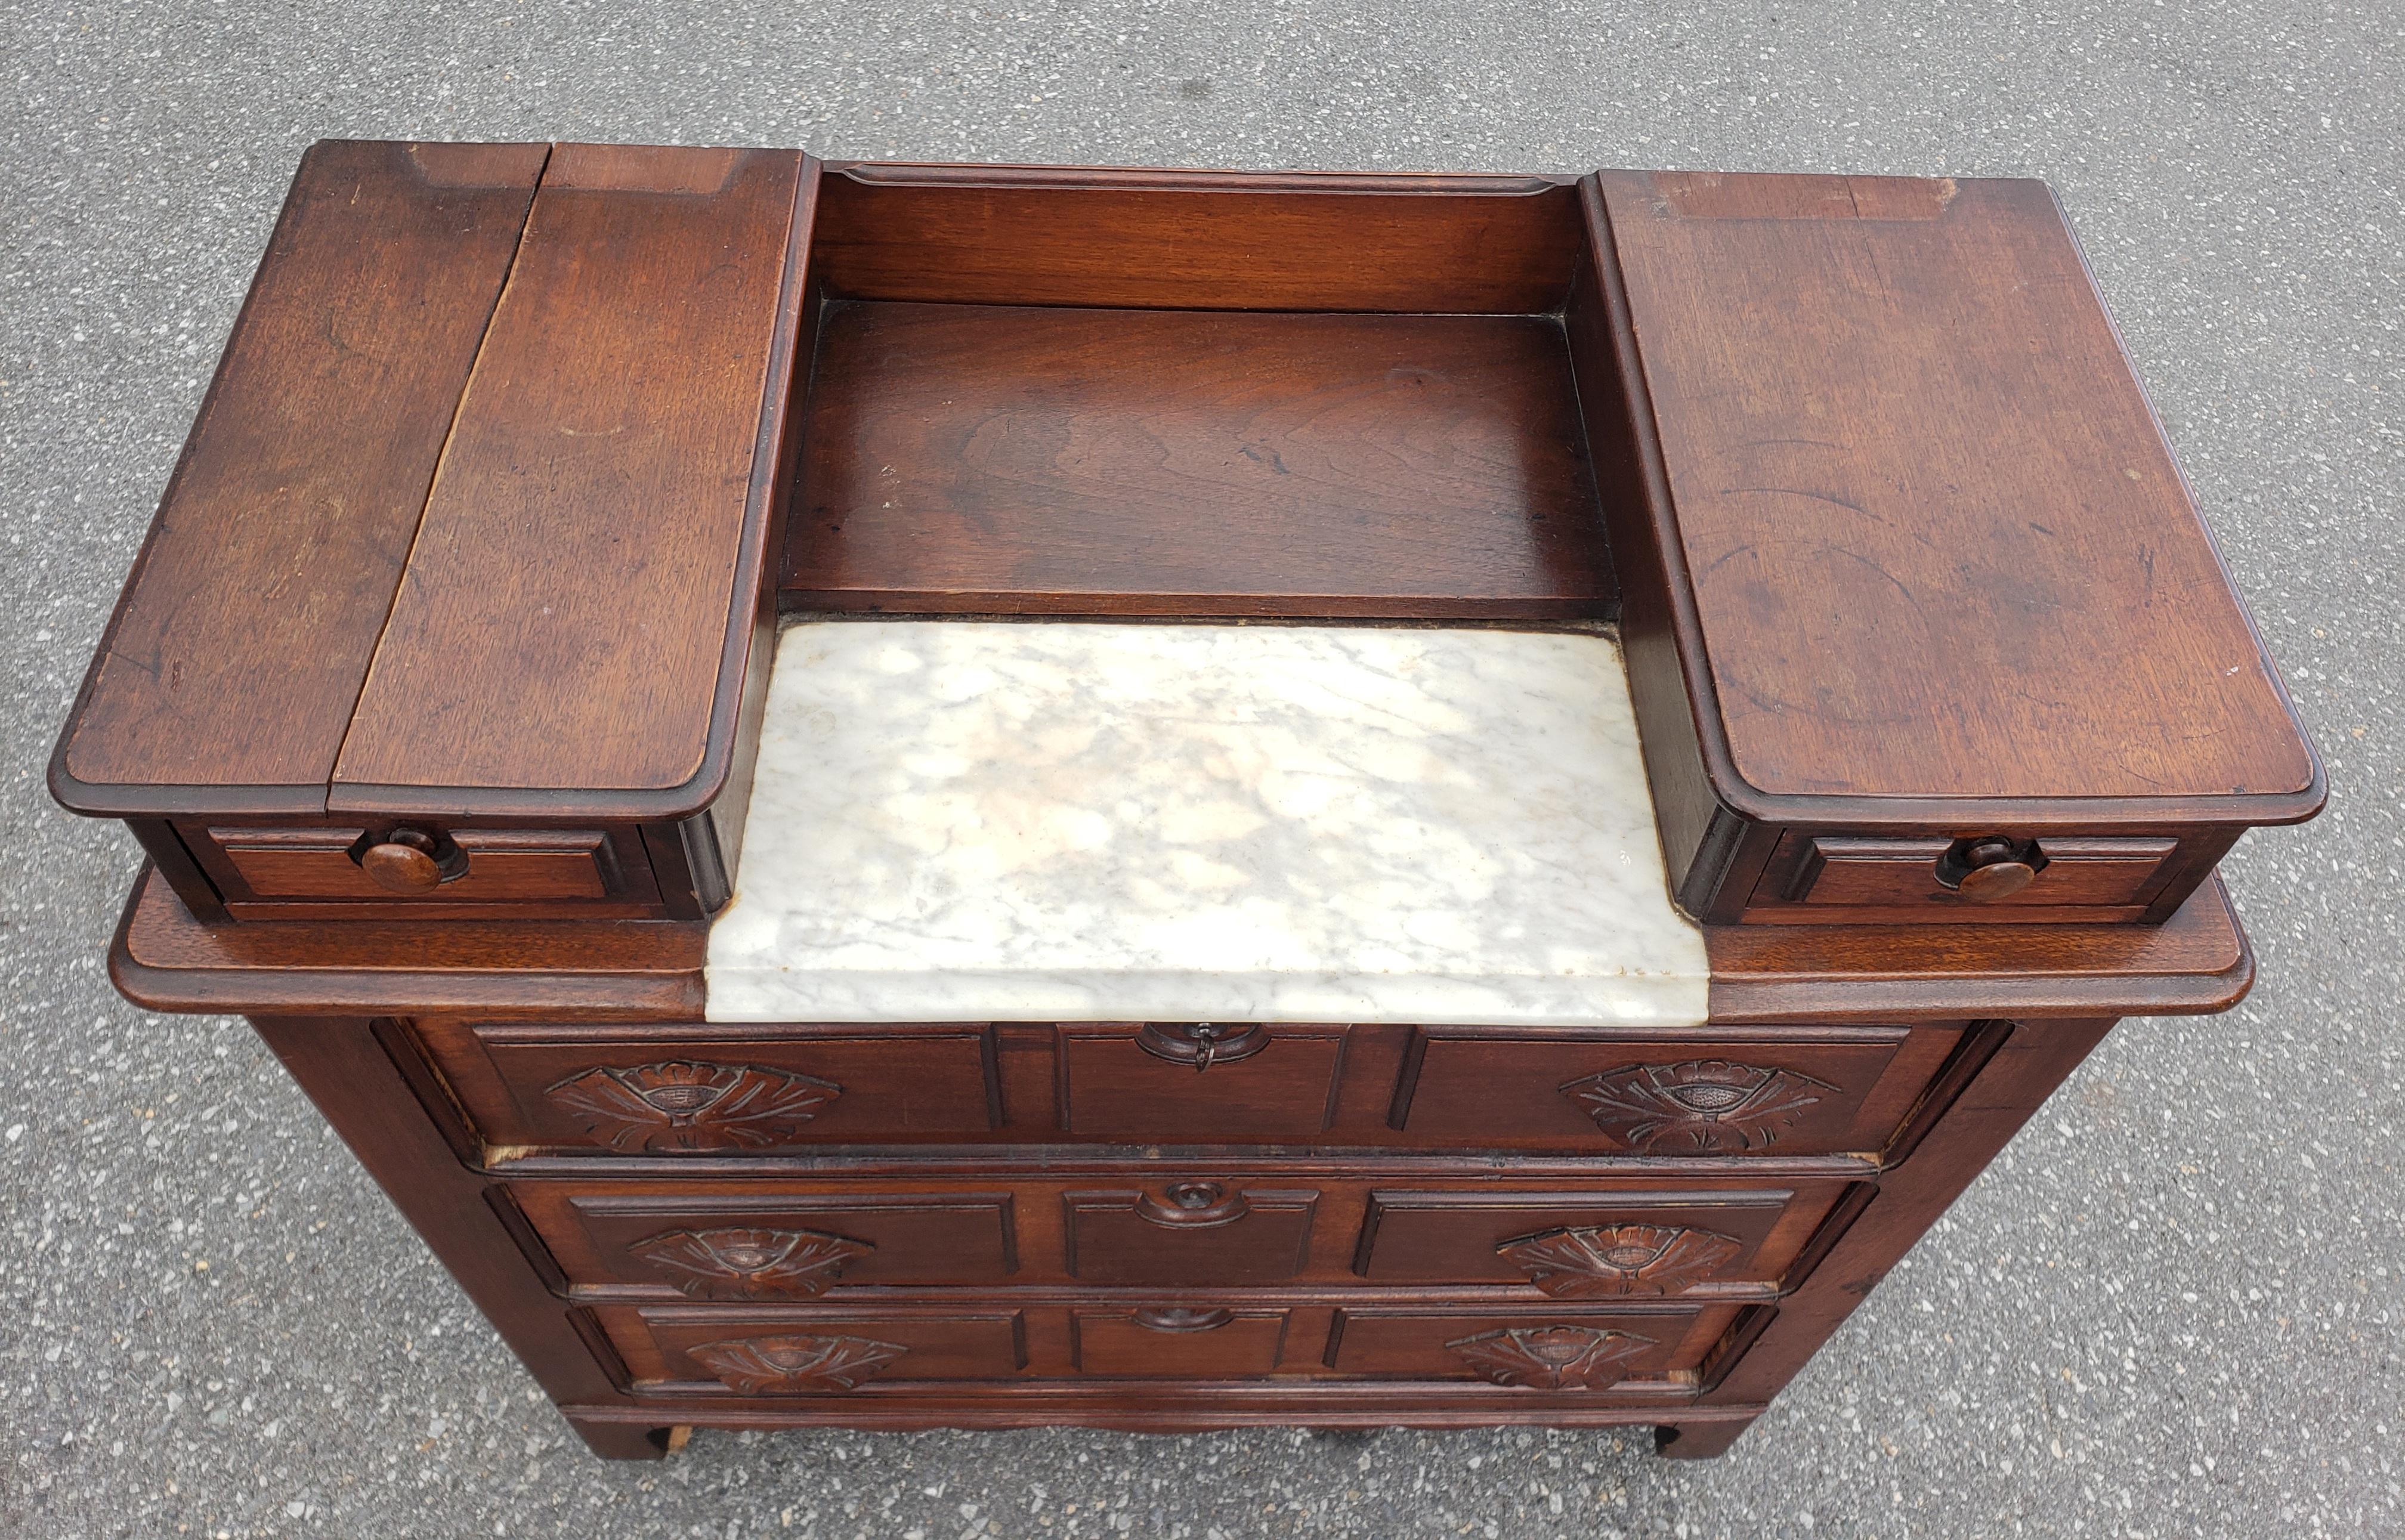 Woodwork 19th C. American Empire Eastlake Mahogany Dresser w/ Marble Top Inset and Mirror For Sale